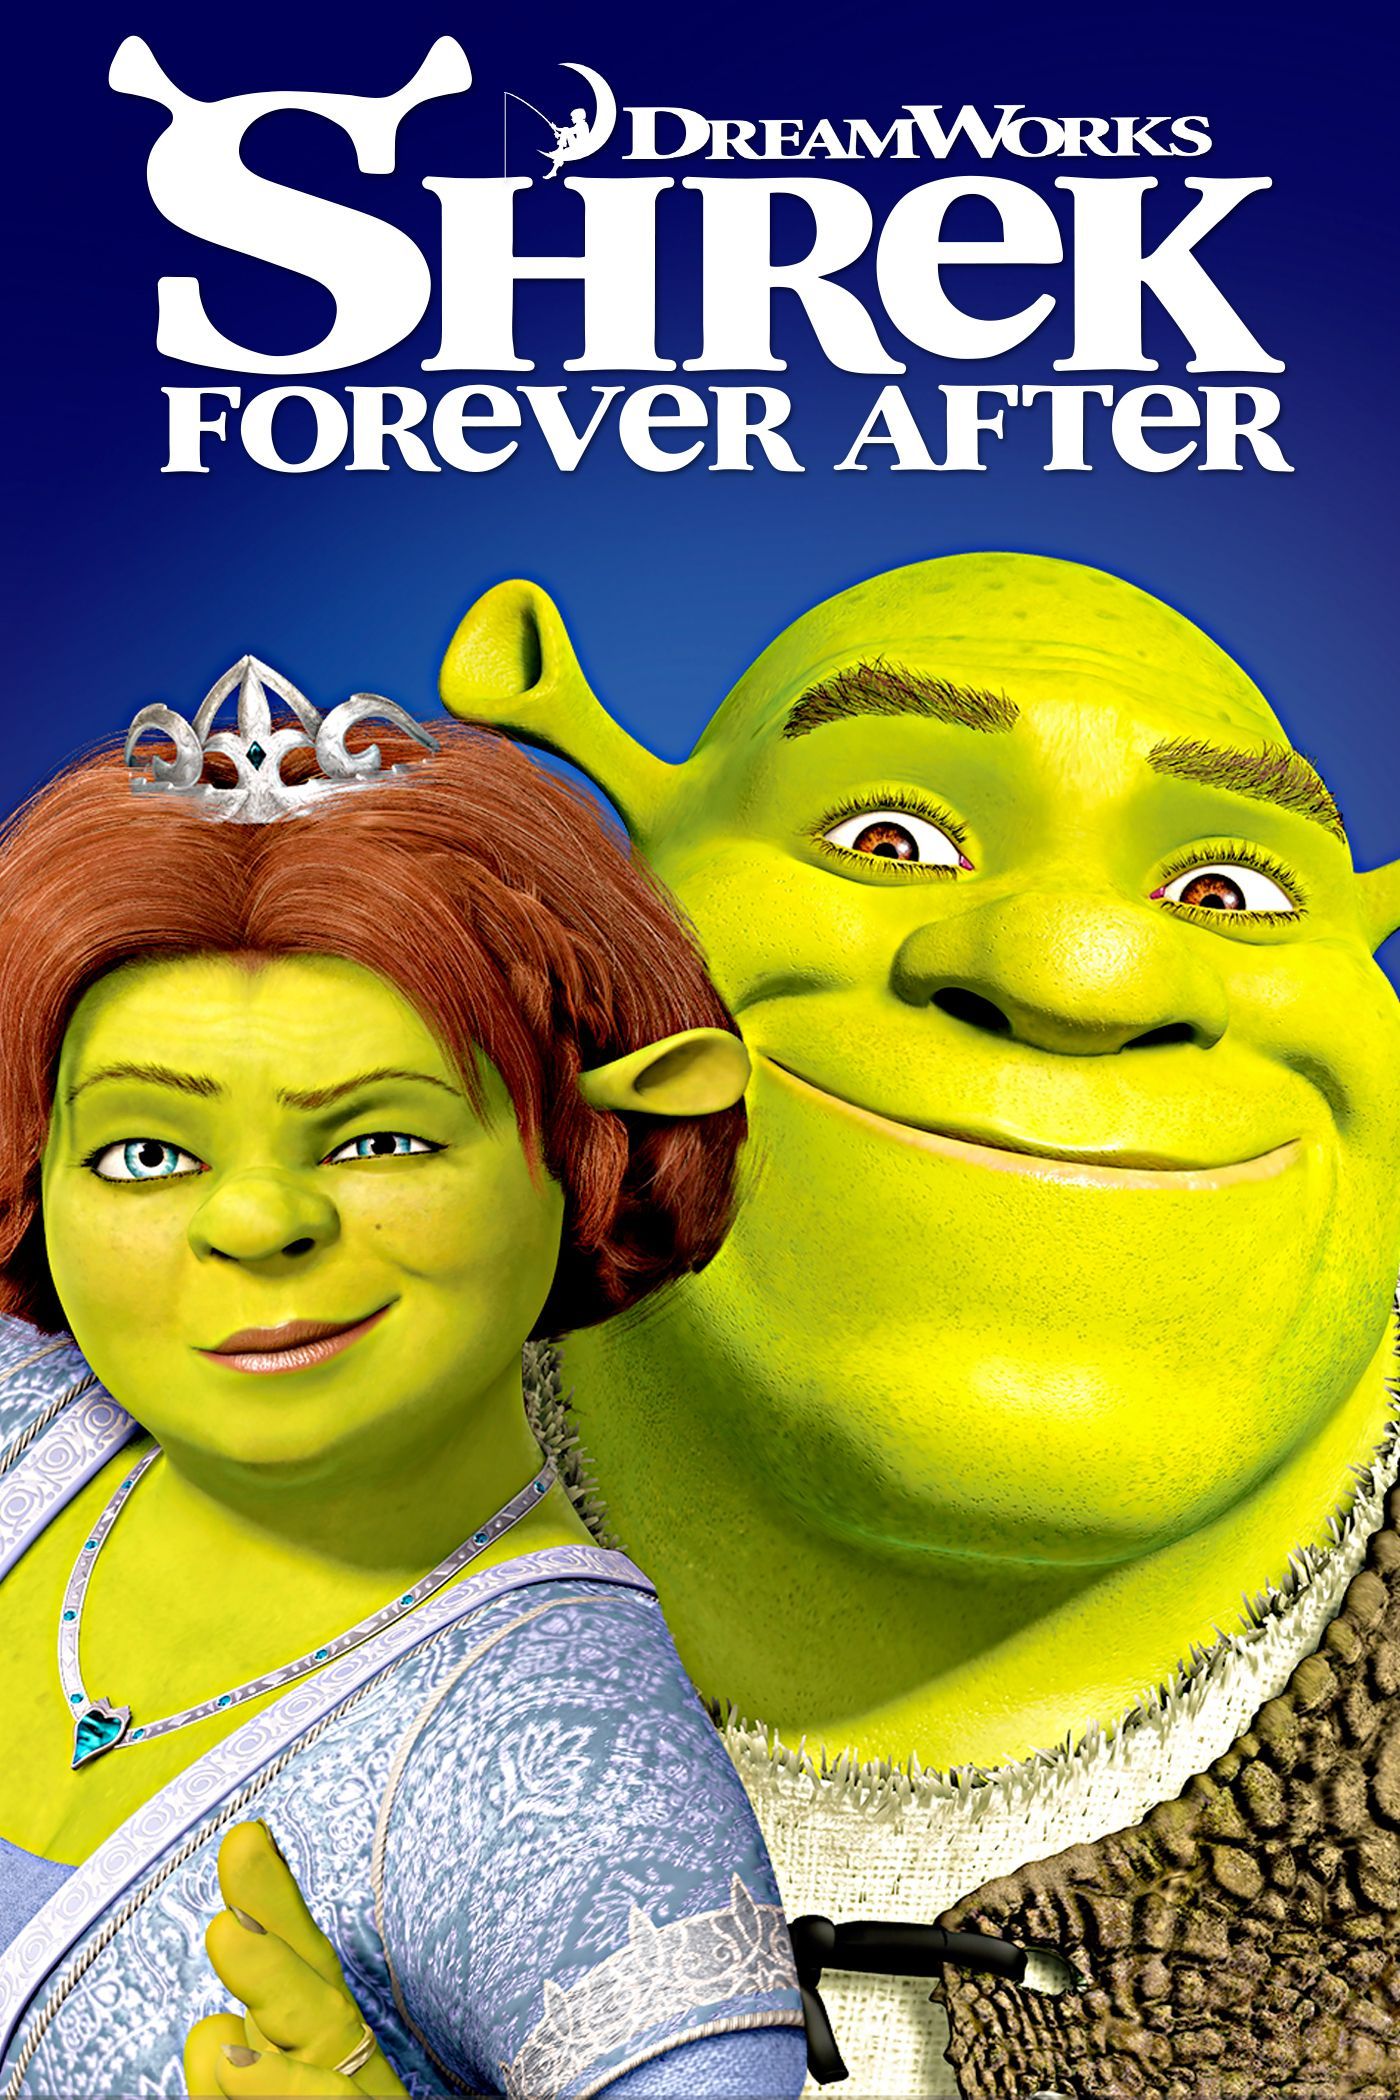 Shrek Forever After (2010) Hindi Dubbed BluRay download full movie